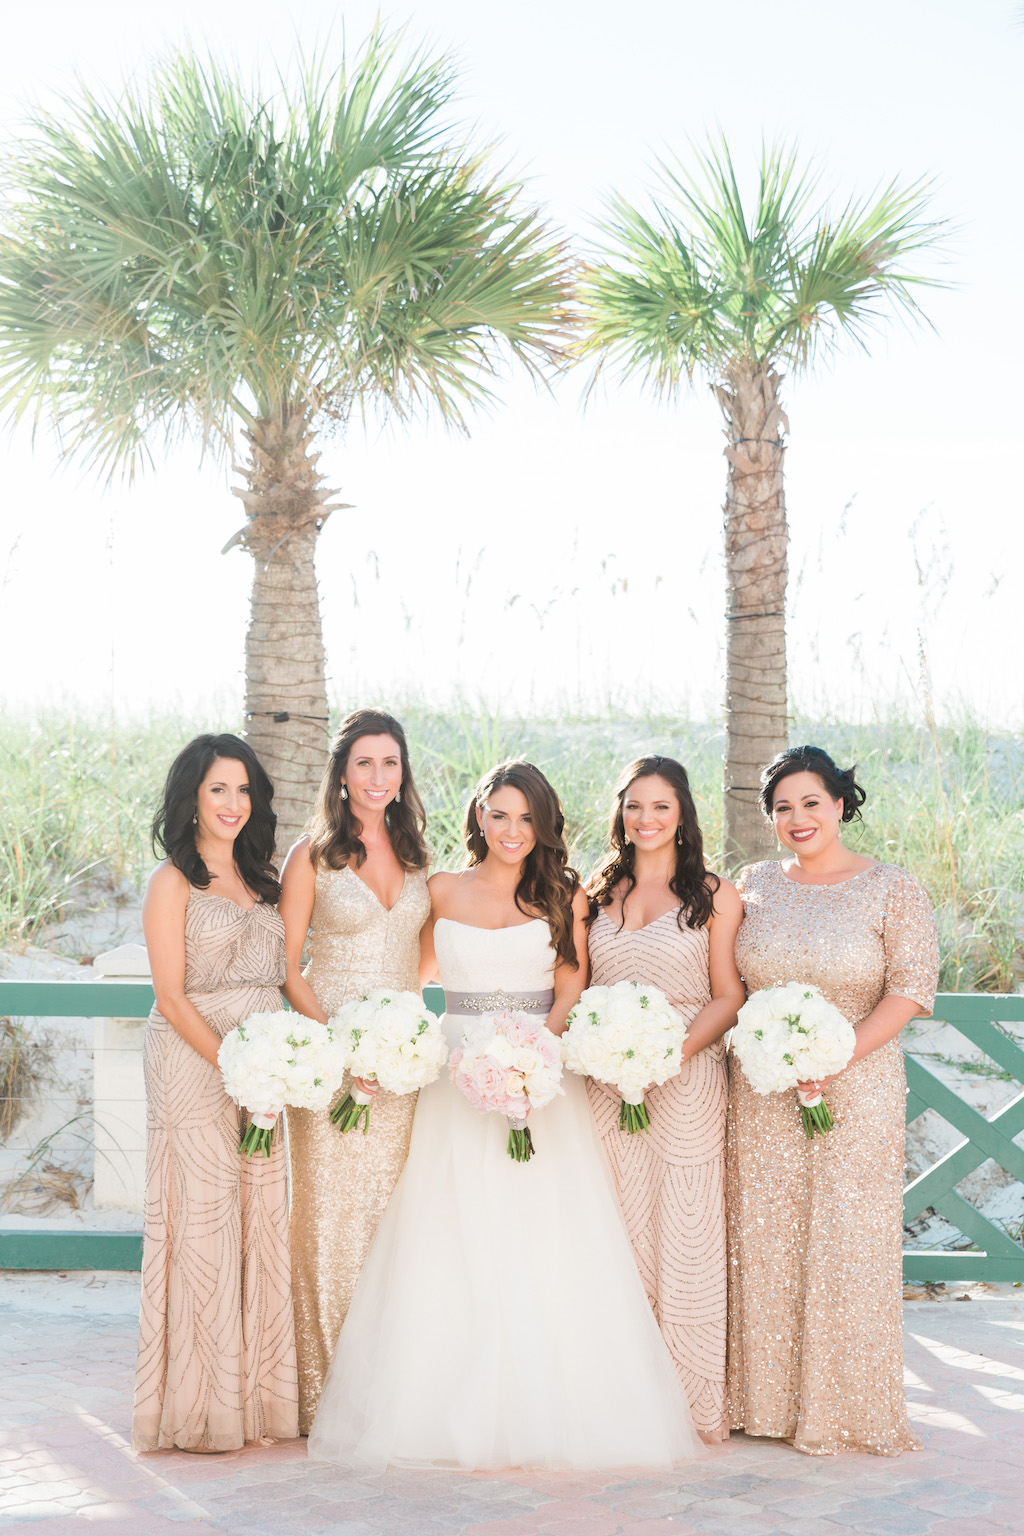 Outdoor St. Pete Beach Bridal Party Portrait, Bridesmaids in Gold Sequin Mismatched Dresses, Bride in Strapless Scoop Neck Ballgown Wedding Dress with Grey Sash and Pink and White Floral Bouquet